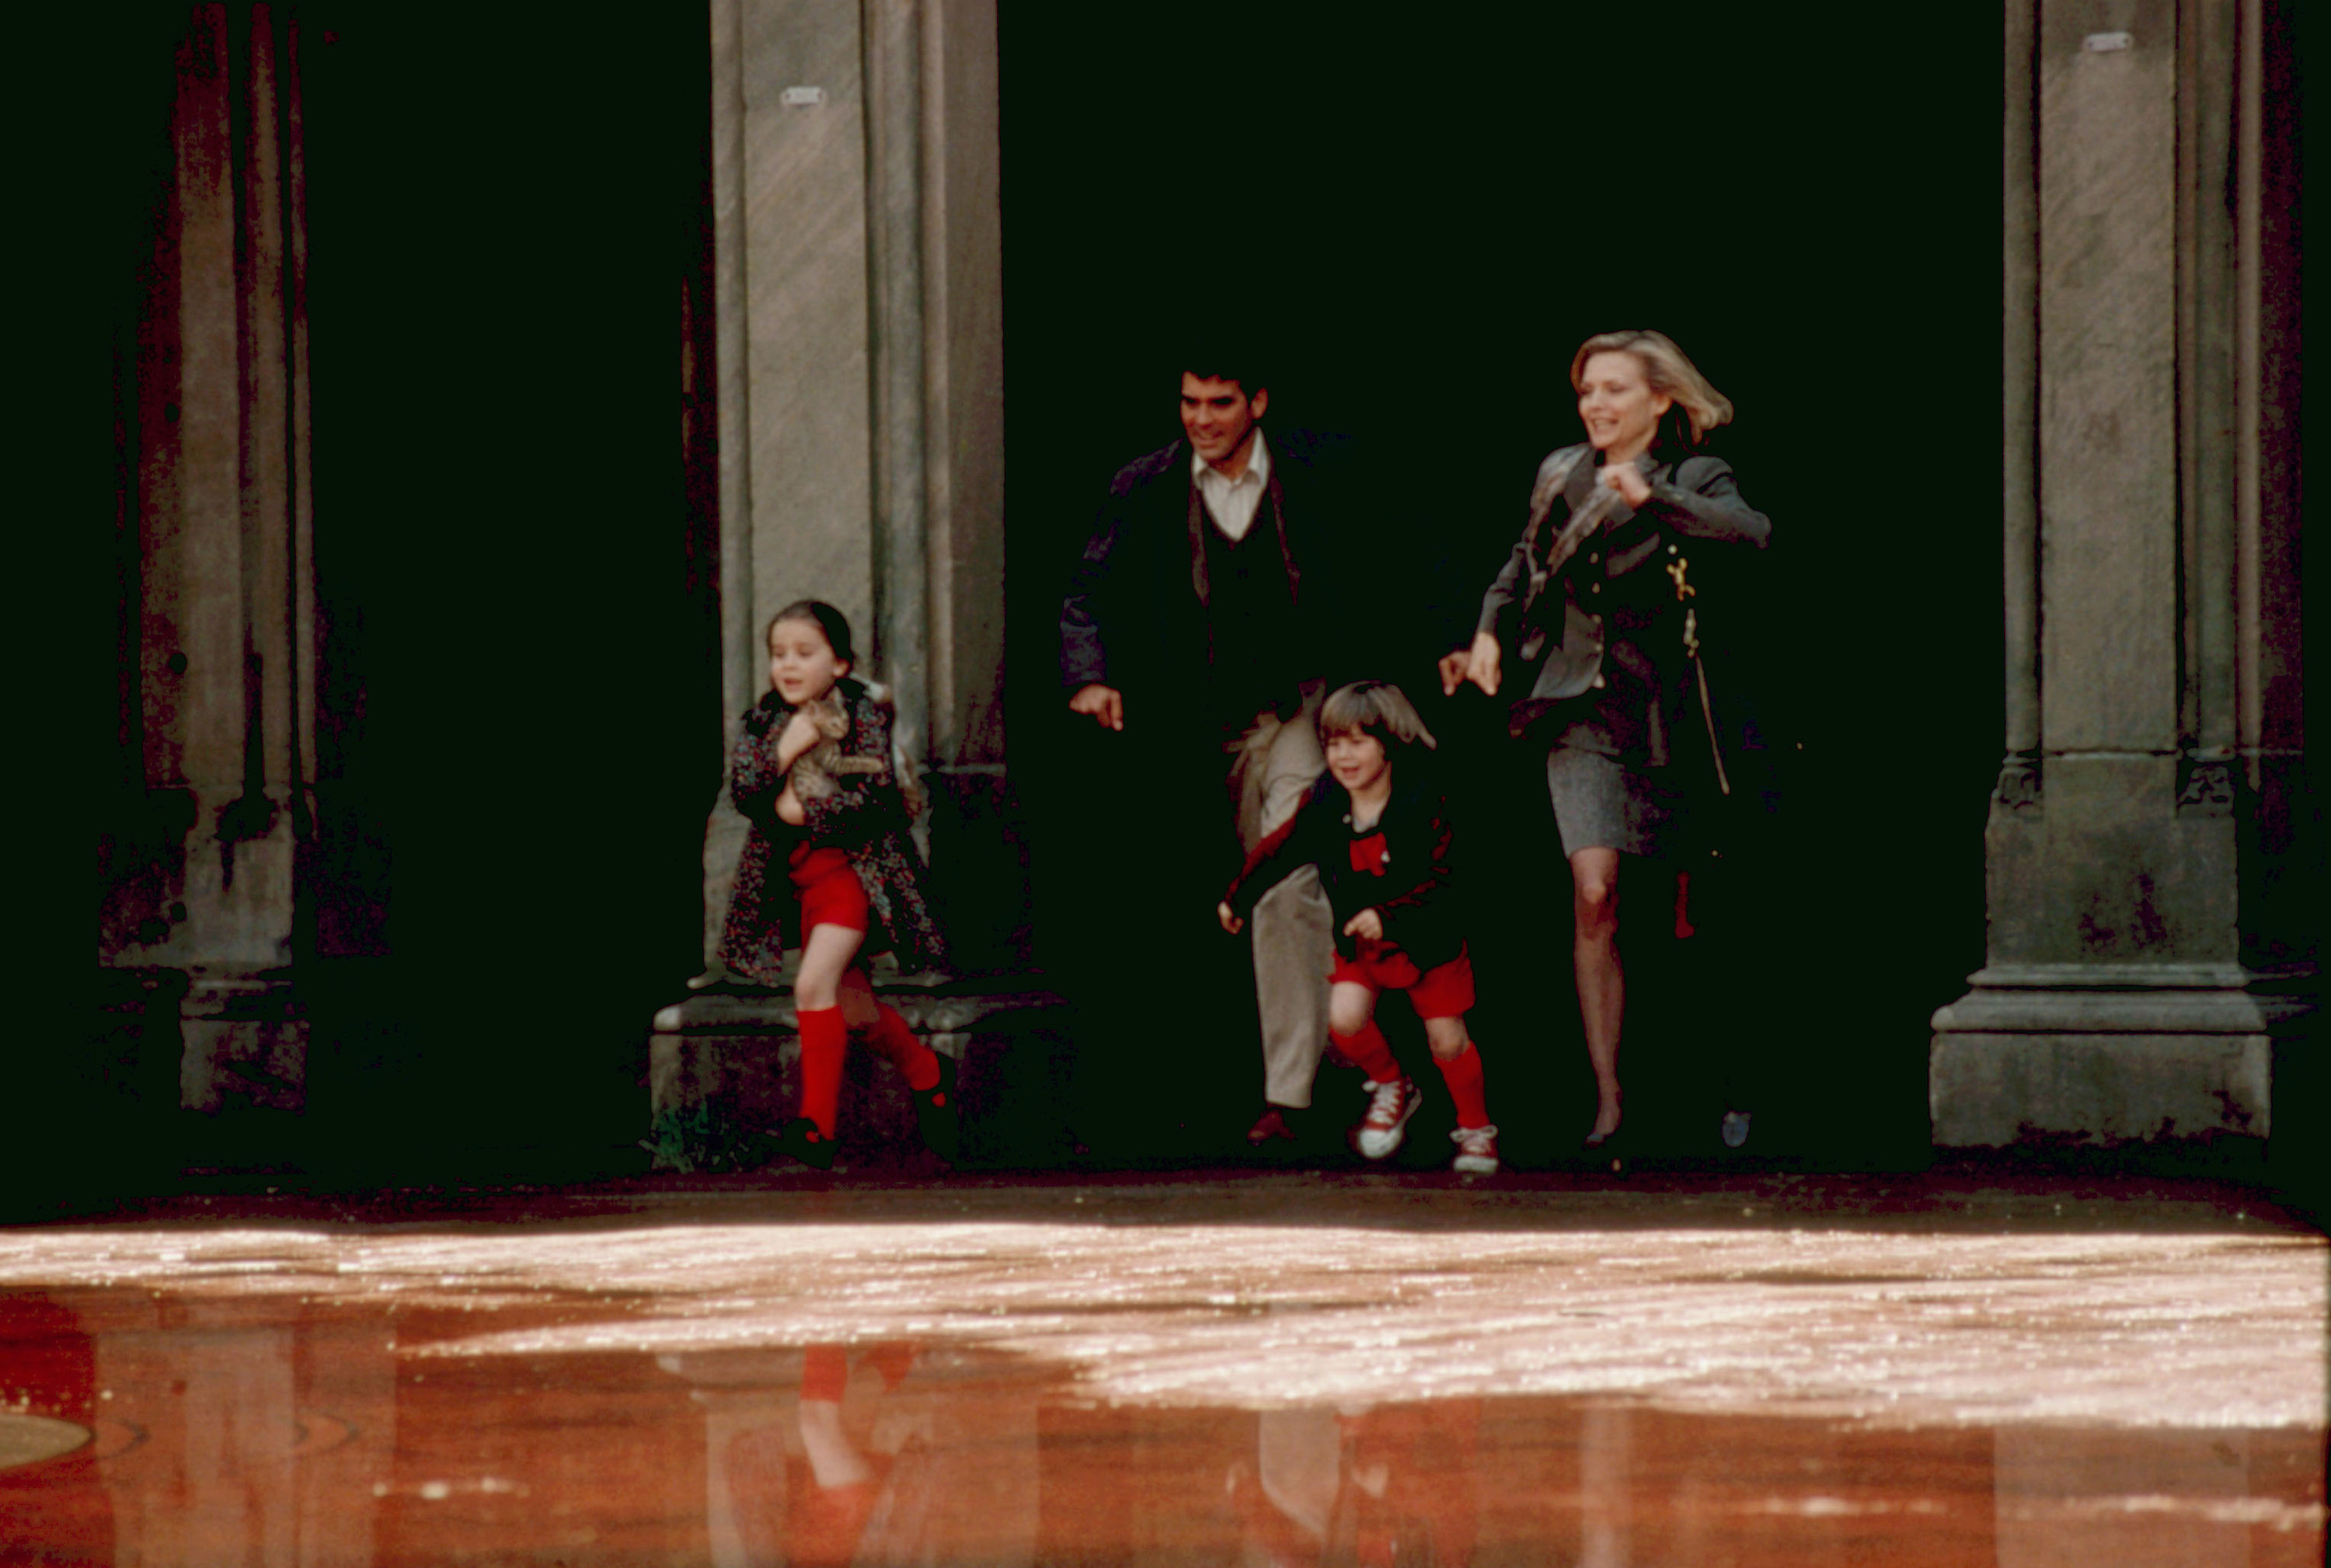 Mae Whitman, George Clooney, Alex D. Linz, Michelle Pfeiffer running out of a building